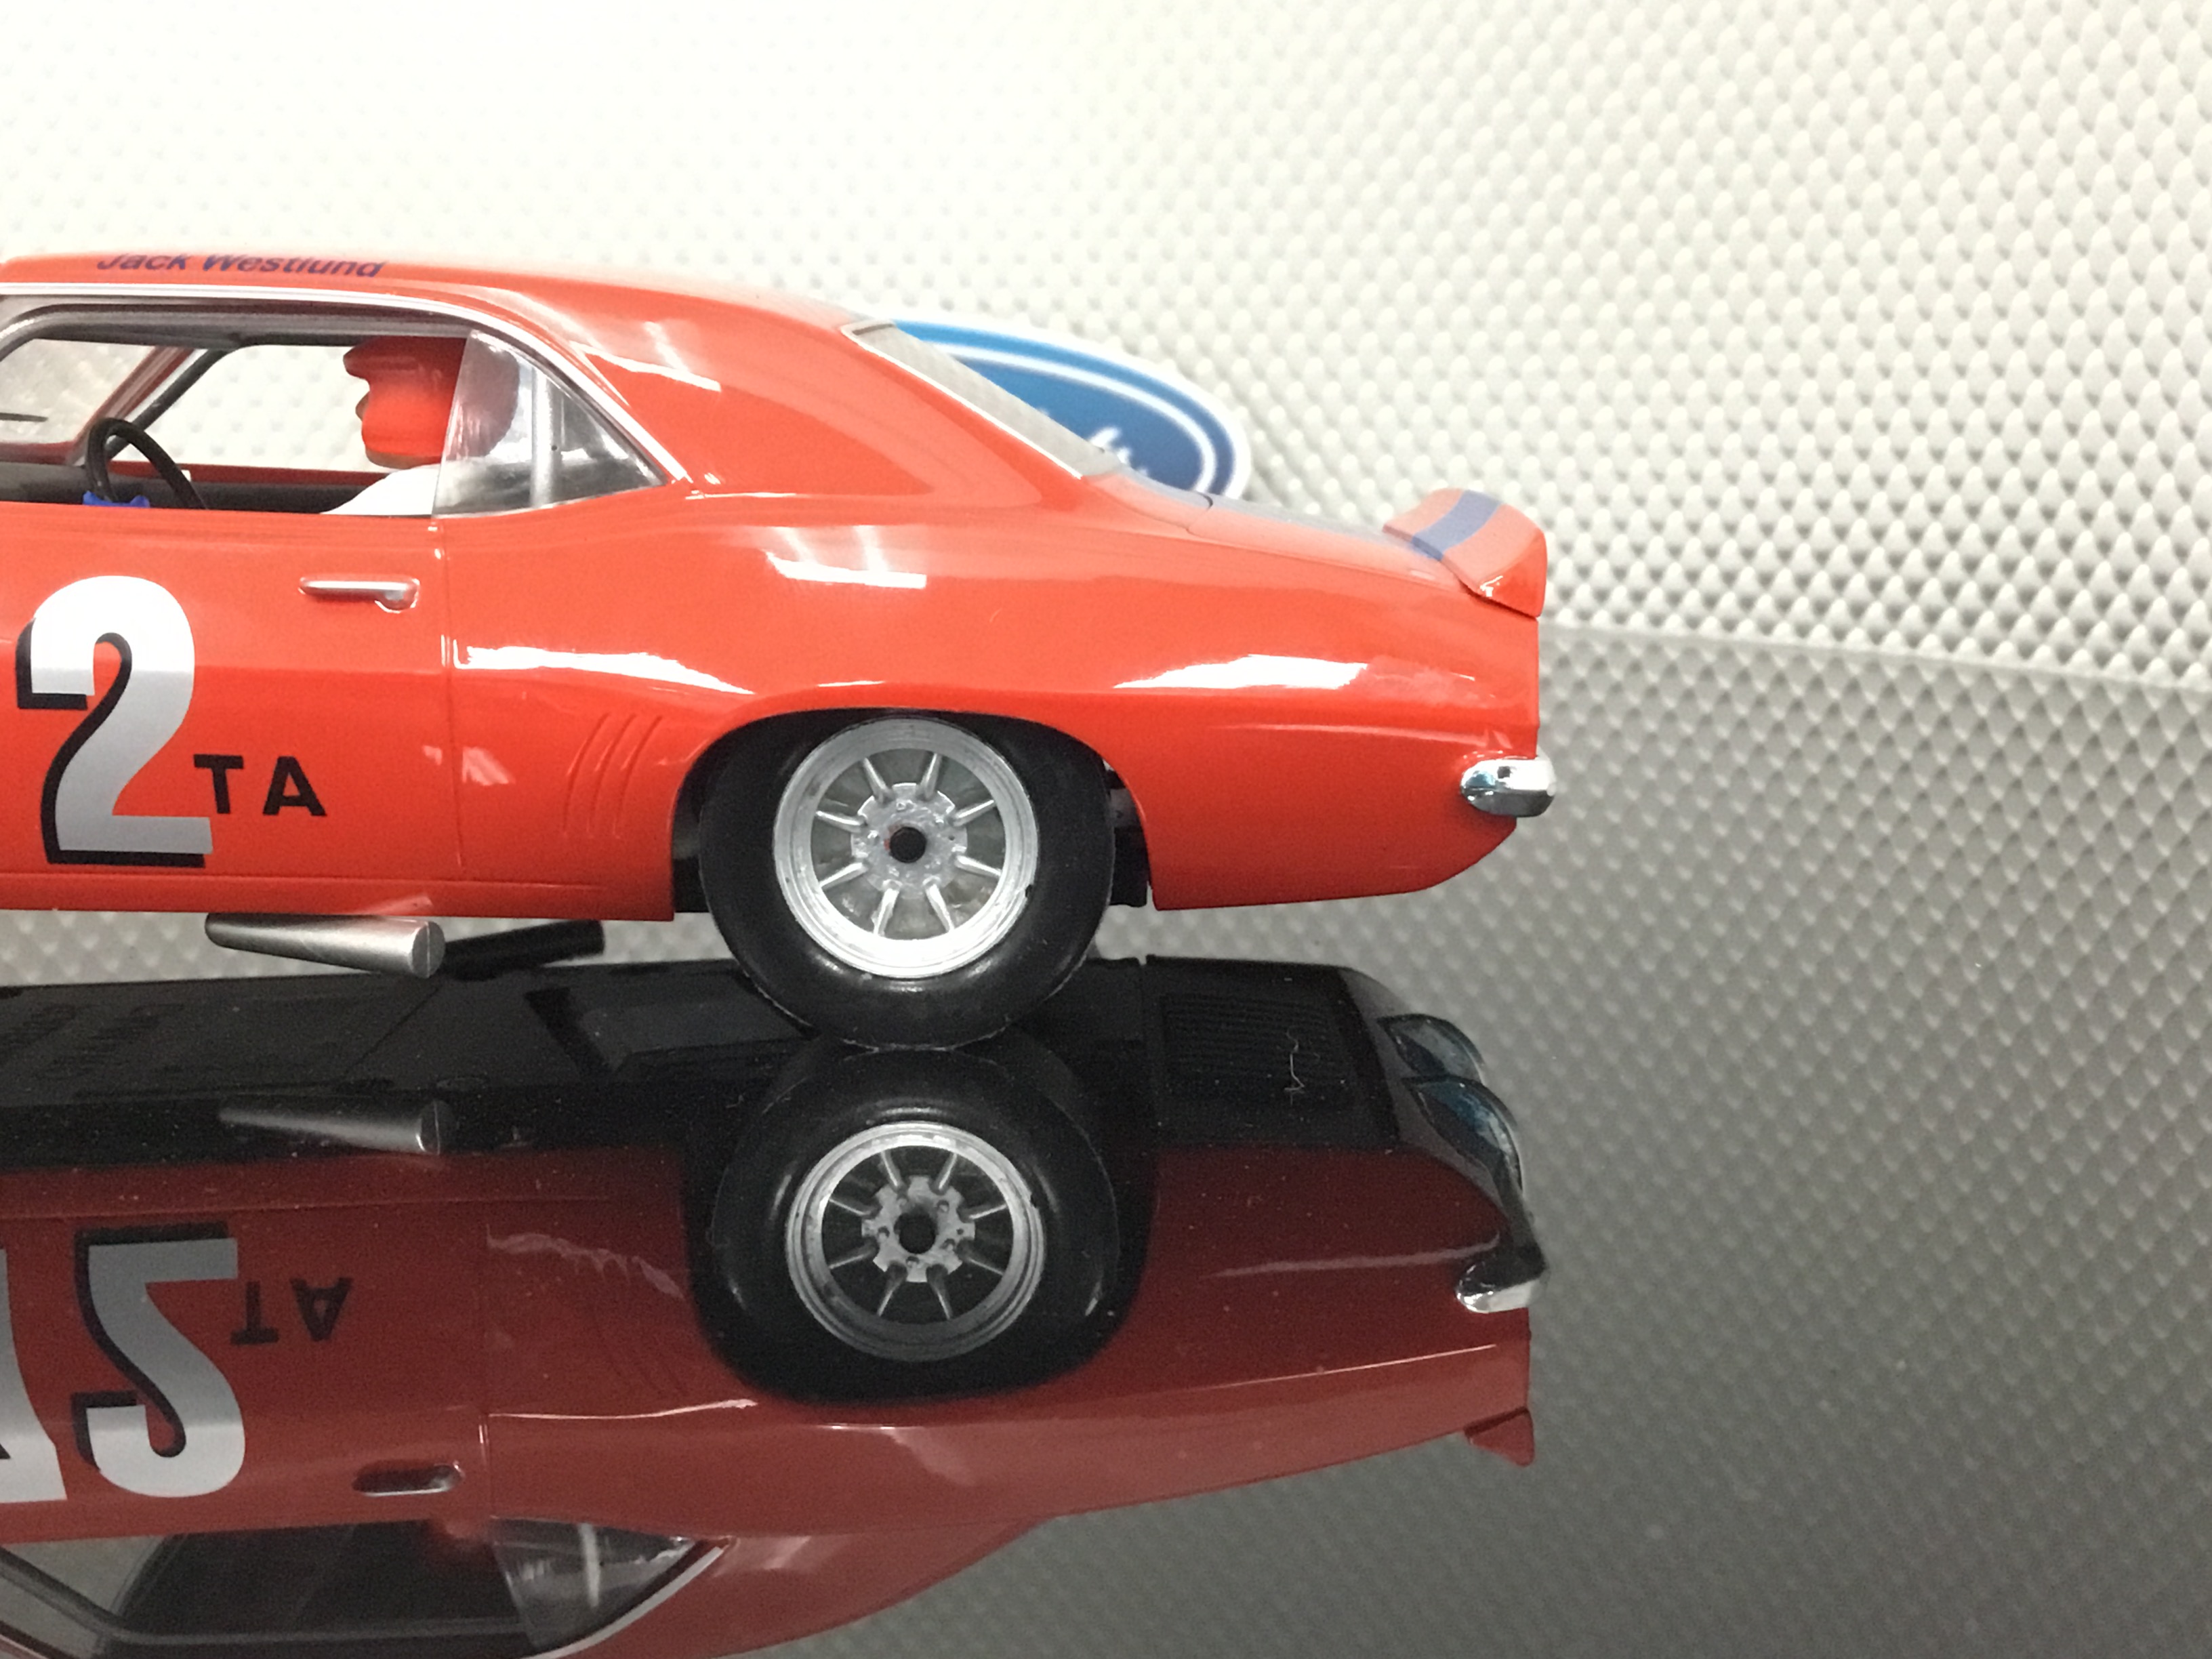 Details about   #42 Swede Savage Barracuda Trans AM Race Series 1/32nd Scale Slot Car Decals 